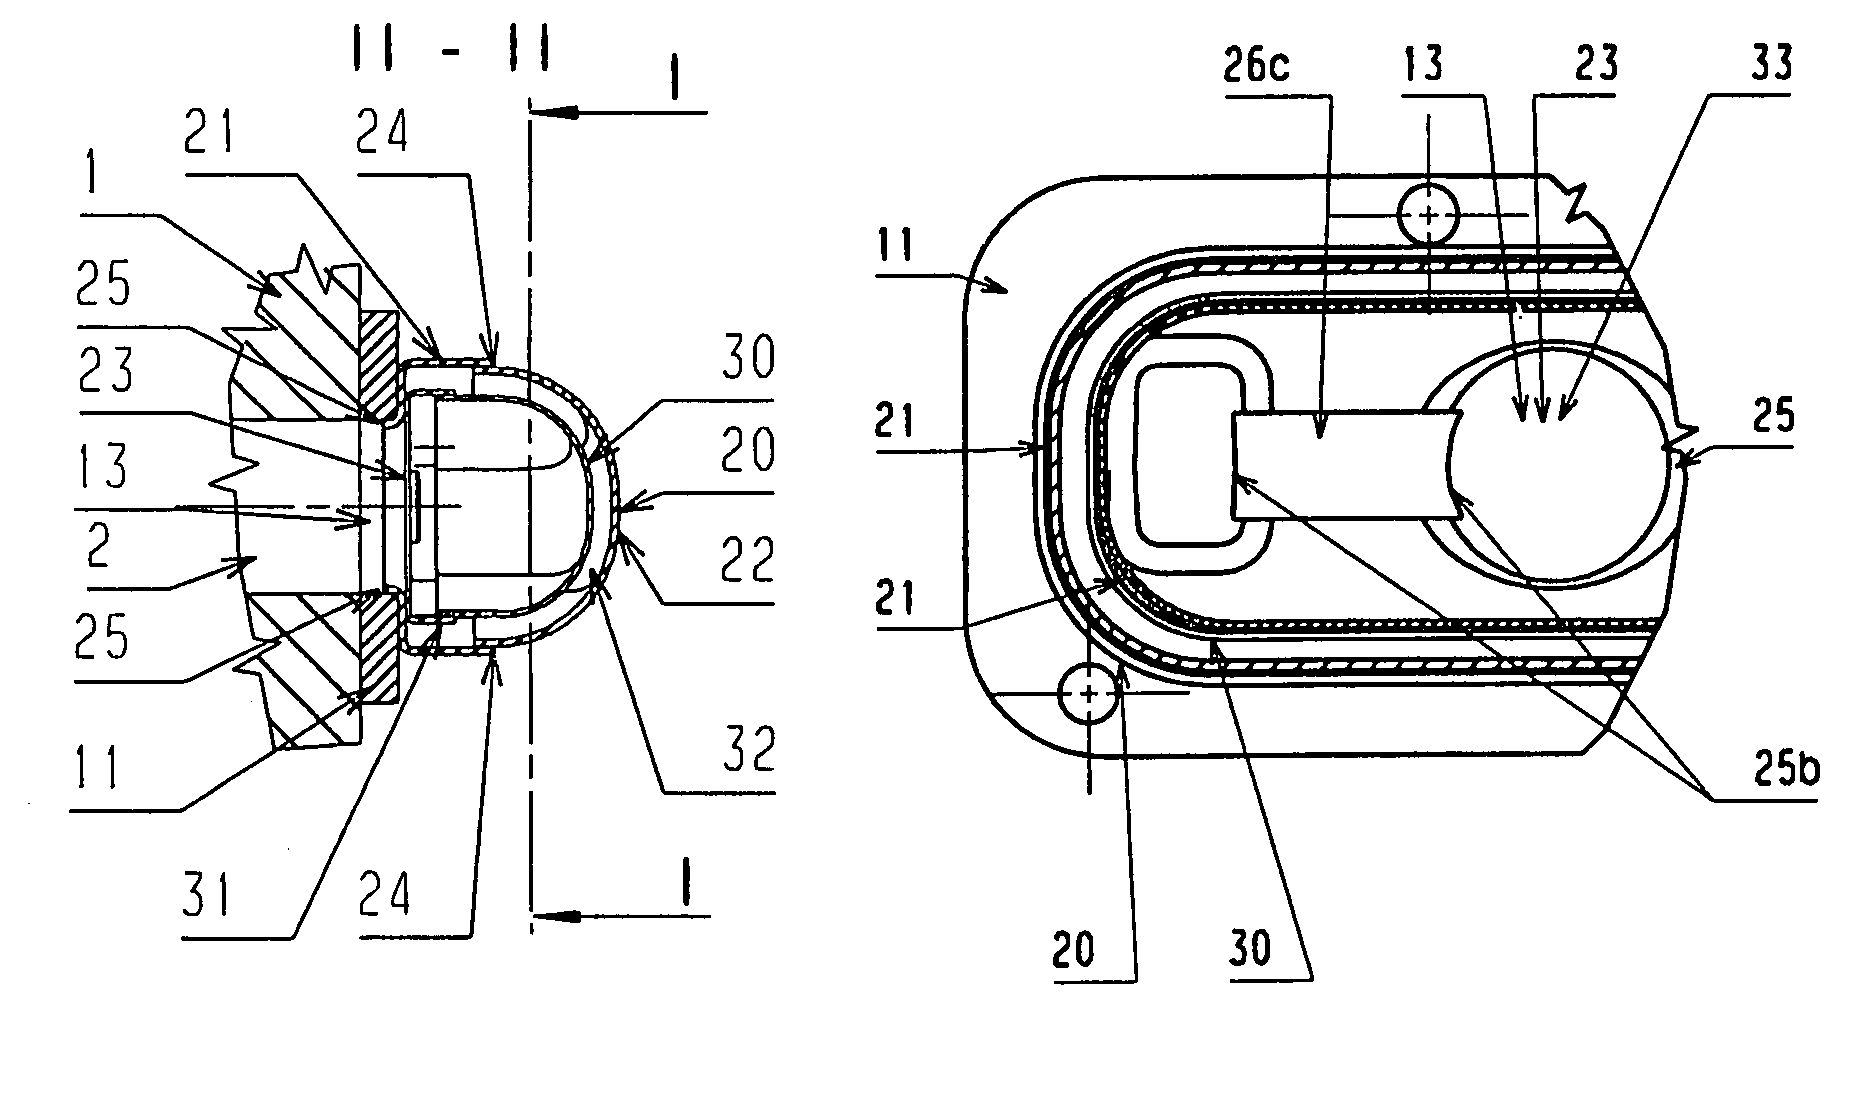 Air gap-insulated exhaust manifold for internal combustion engines